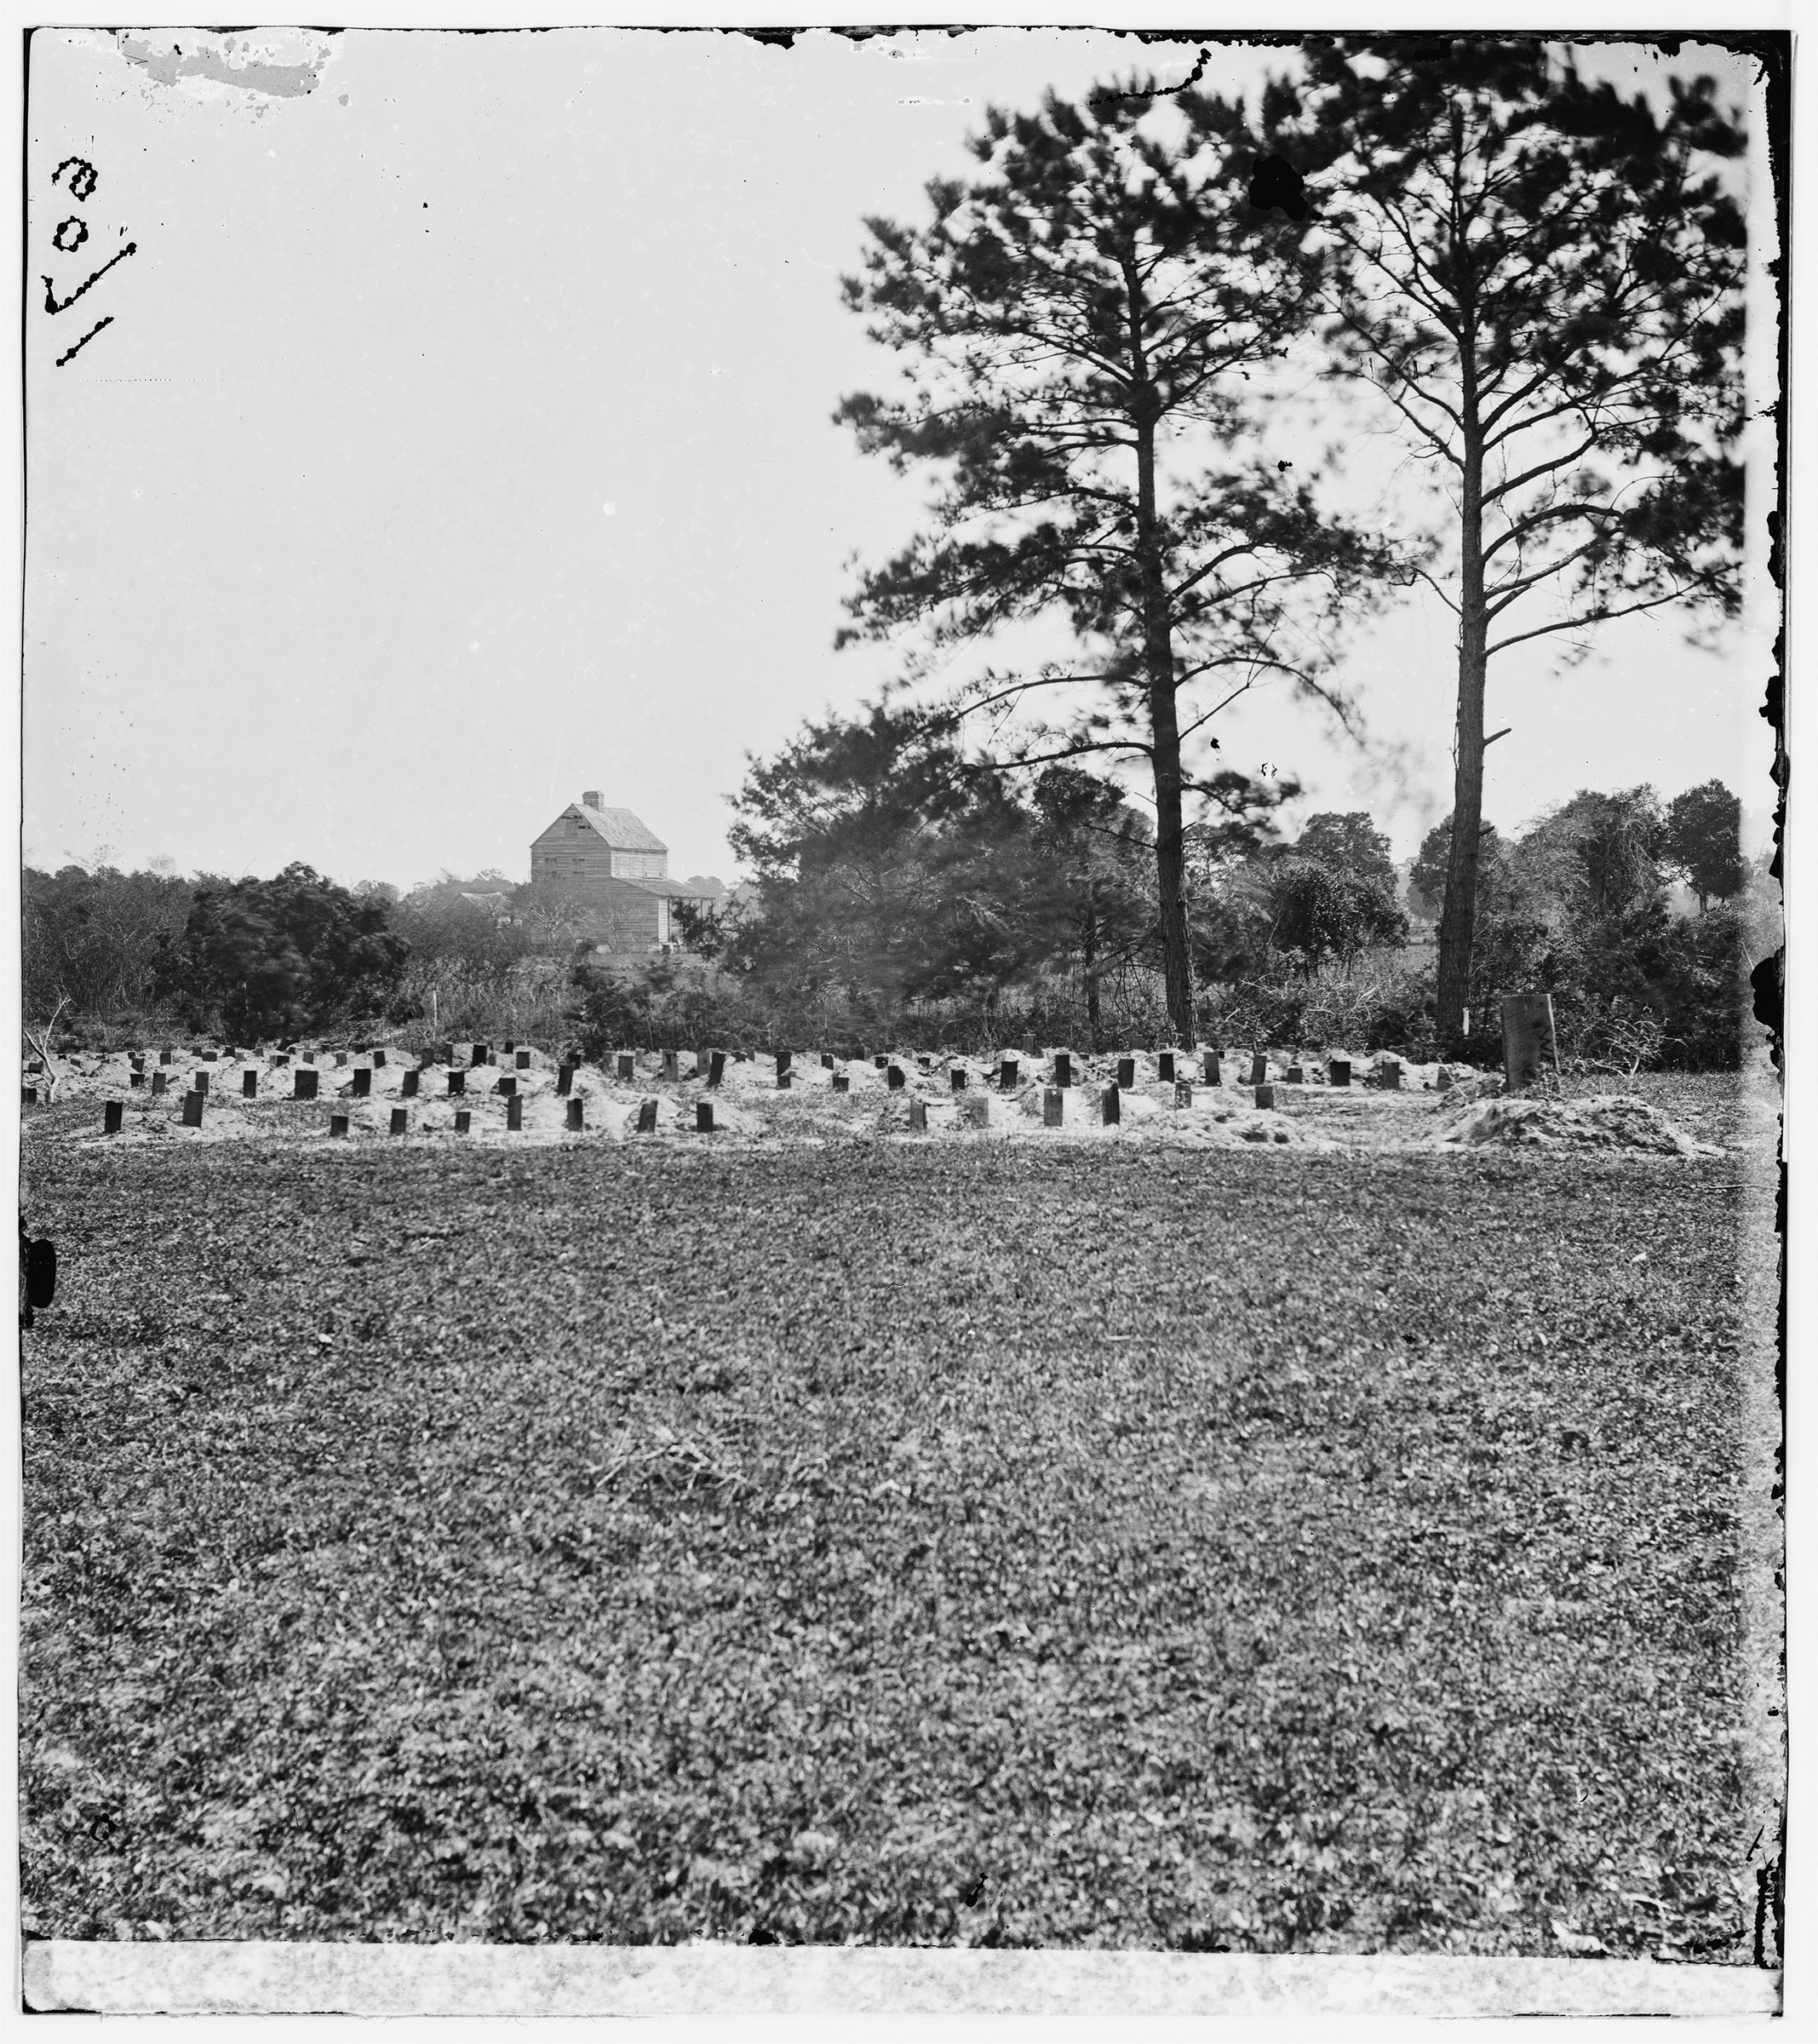 An April 1865 photo of the graves of Union soldiers buried at the race course-turned-Confederate-prison where historians believe the earliest Memorial Day ceremony took place. (Civil war photographs, 1861-1865, Library of Congress, Prints and Photographs Division)